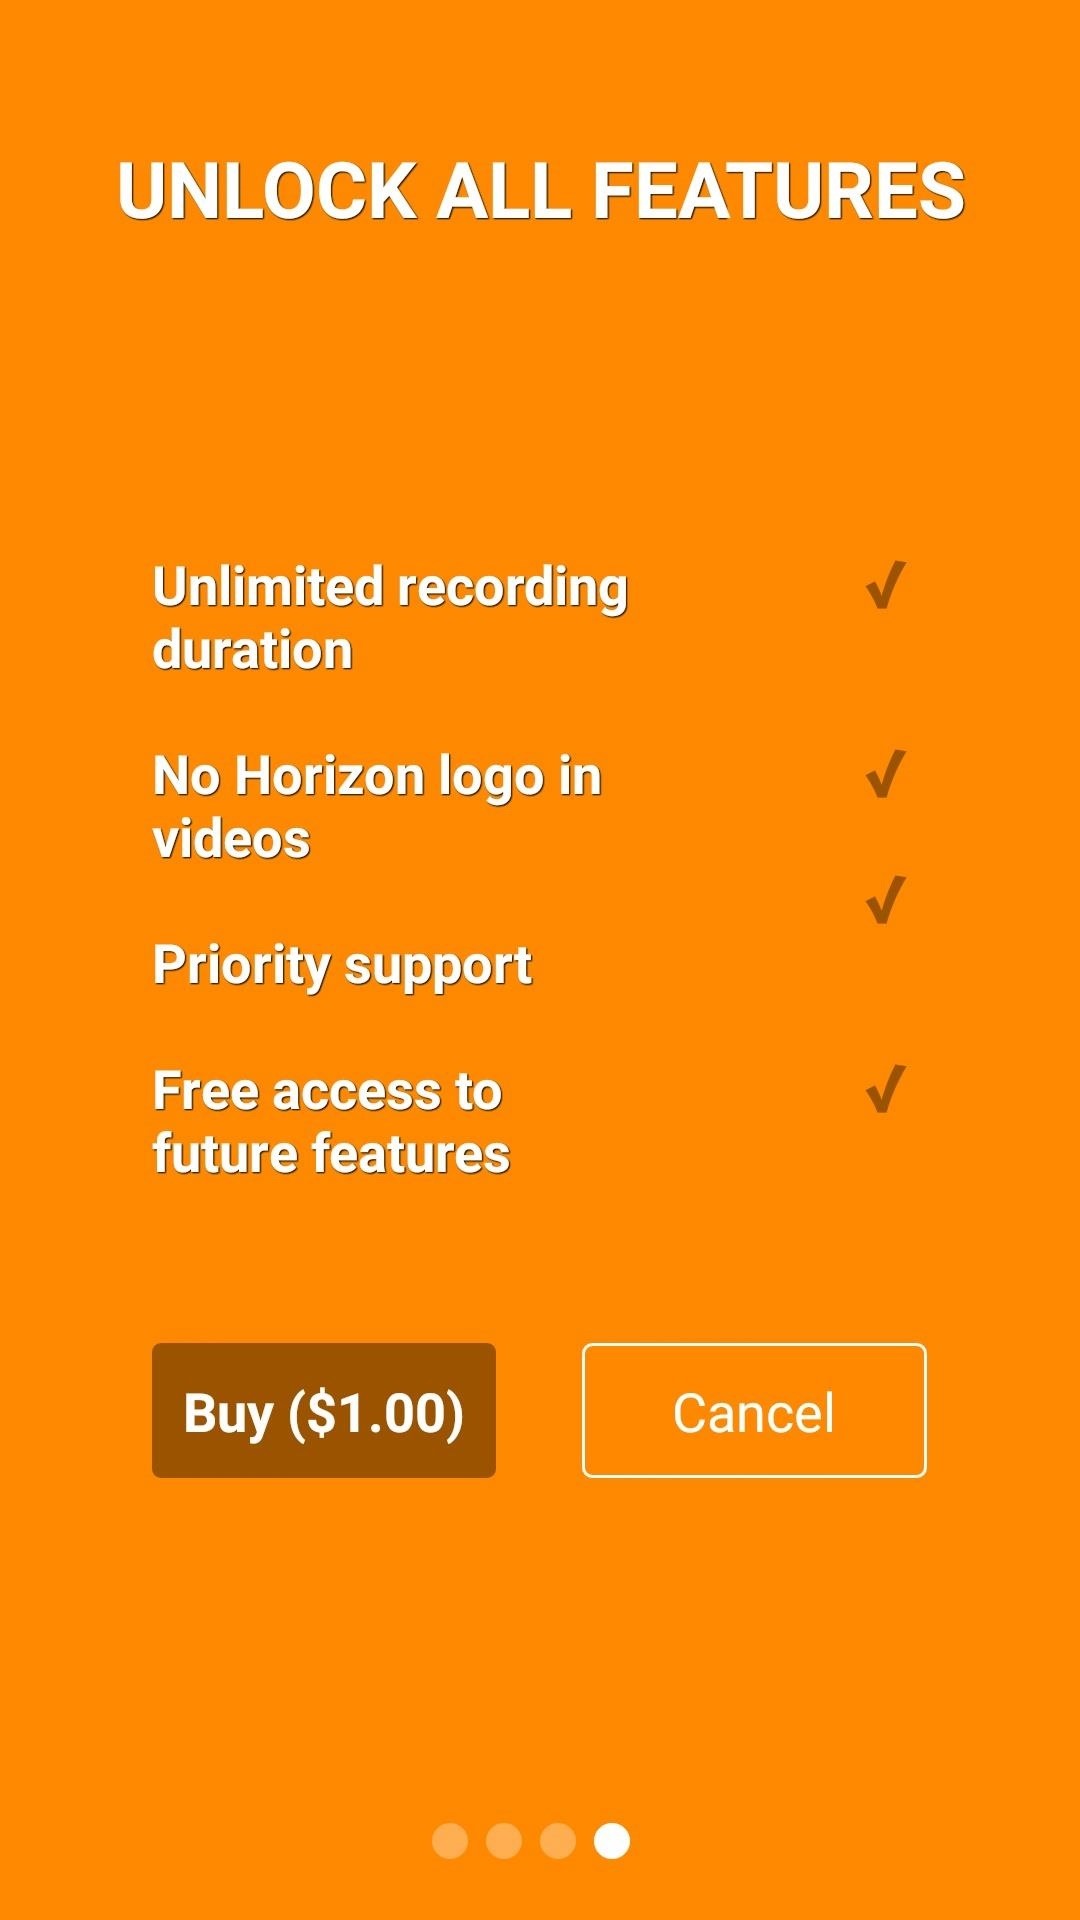 Horizon: The Solution to Crappy Vertical Videos on Android